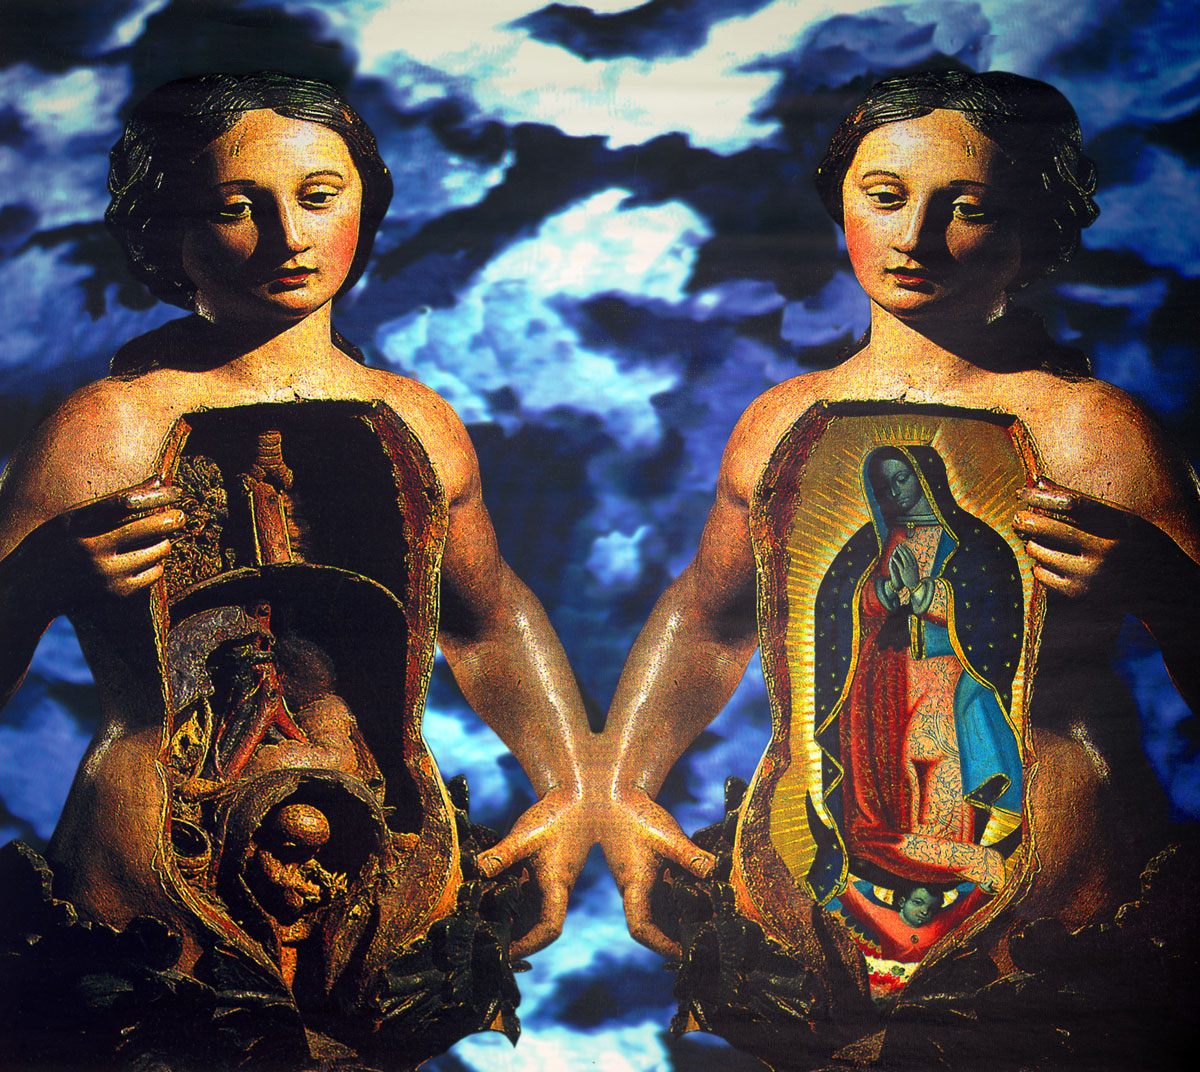 Doubled image of religious figure, one with insides show, other with Virgin of Guadalupe